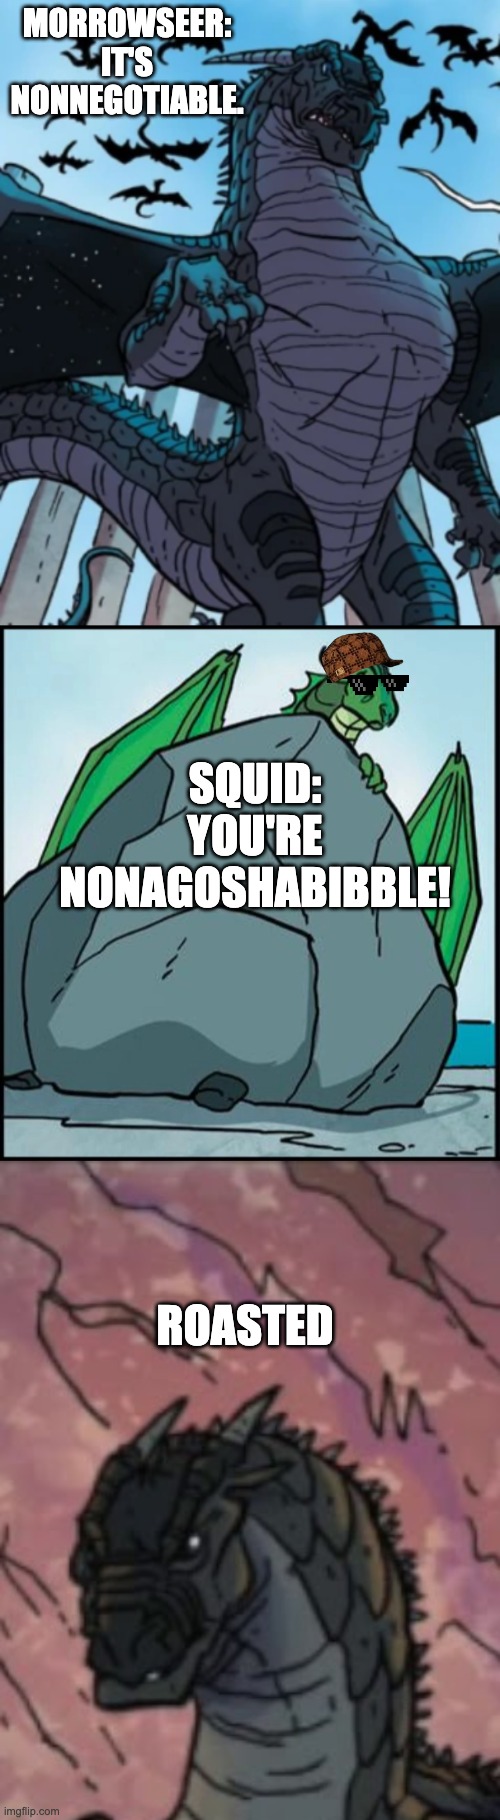 Ooo, Morrowseer is nonagoshabibble! #ROASTED |  MORROWSEER: IT'S NONNEGOTIABLE. SQUID: YOU'RE NONAGOSHABIBBLE! ROASTED | image tagged in wings of fire,funny | made w/ Imgflip meme maker